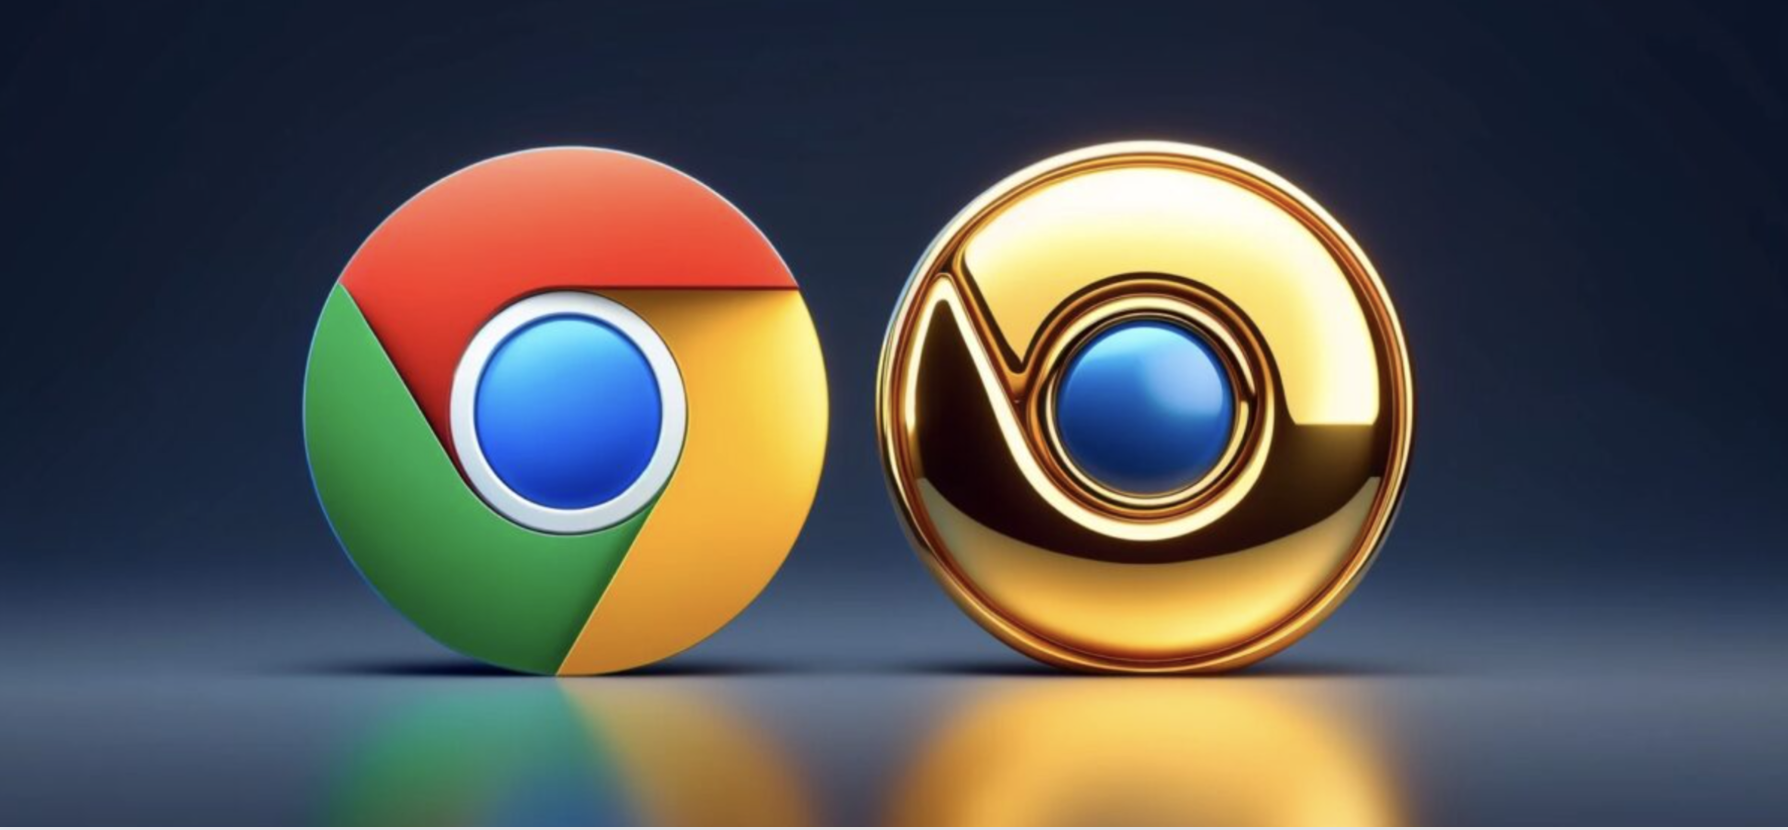 Google Chrome Launches 1st Ever Paid Version: Top 4 Features You Should Knpw